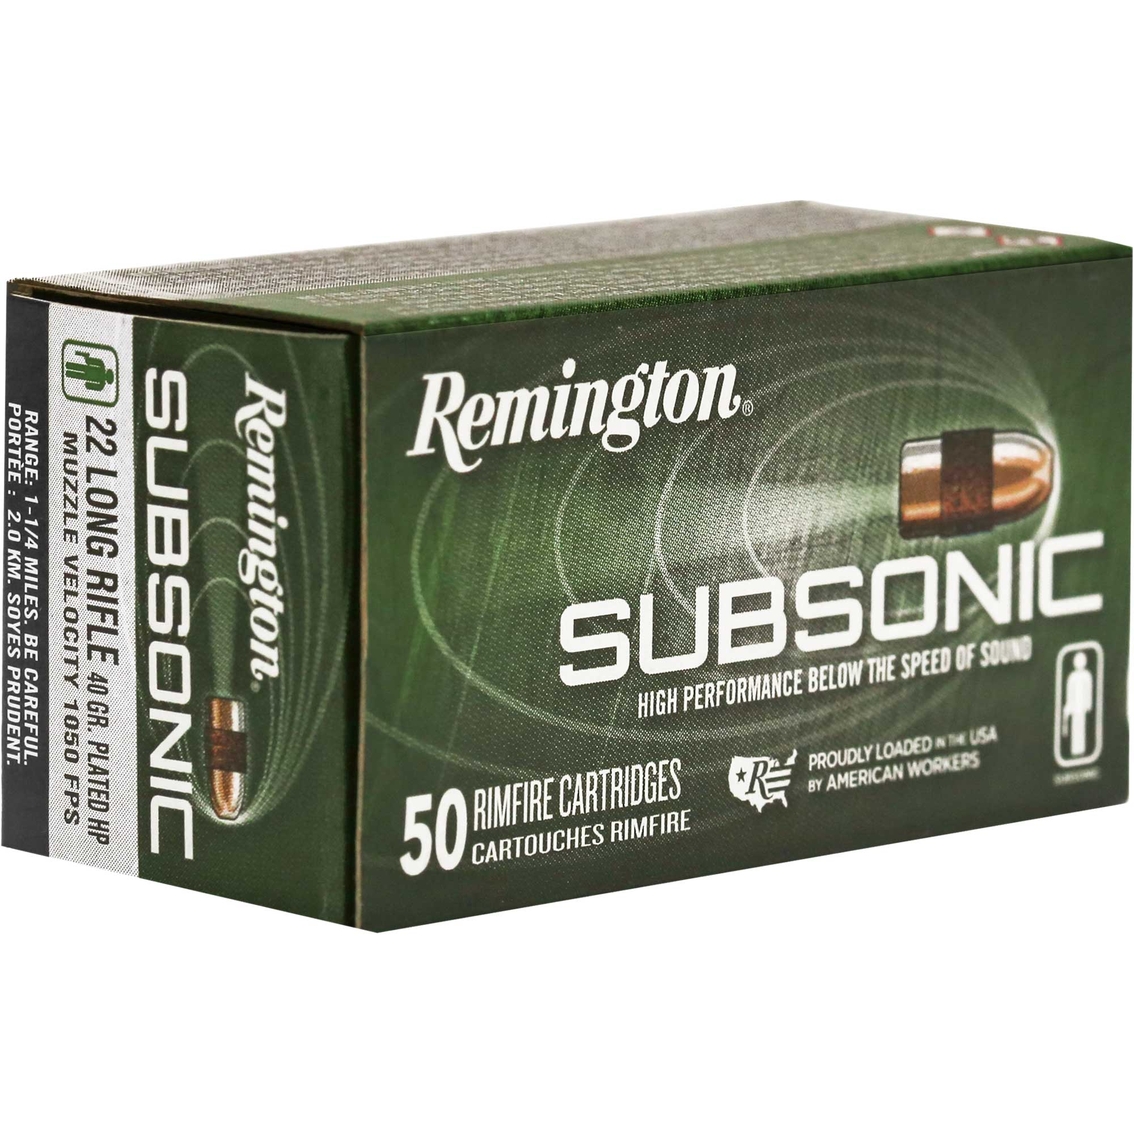 Remington Subsonic .22 LR 40 Gr. Copper Plated Hollow Point 50 Rounds - Image 2 of 3